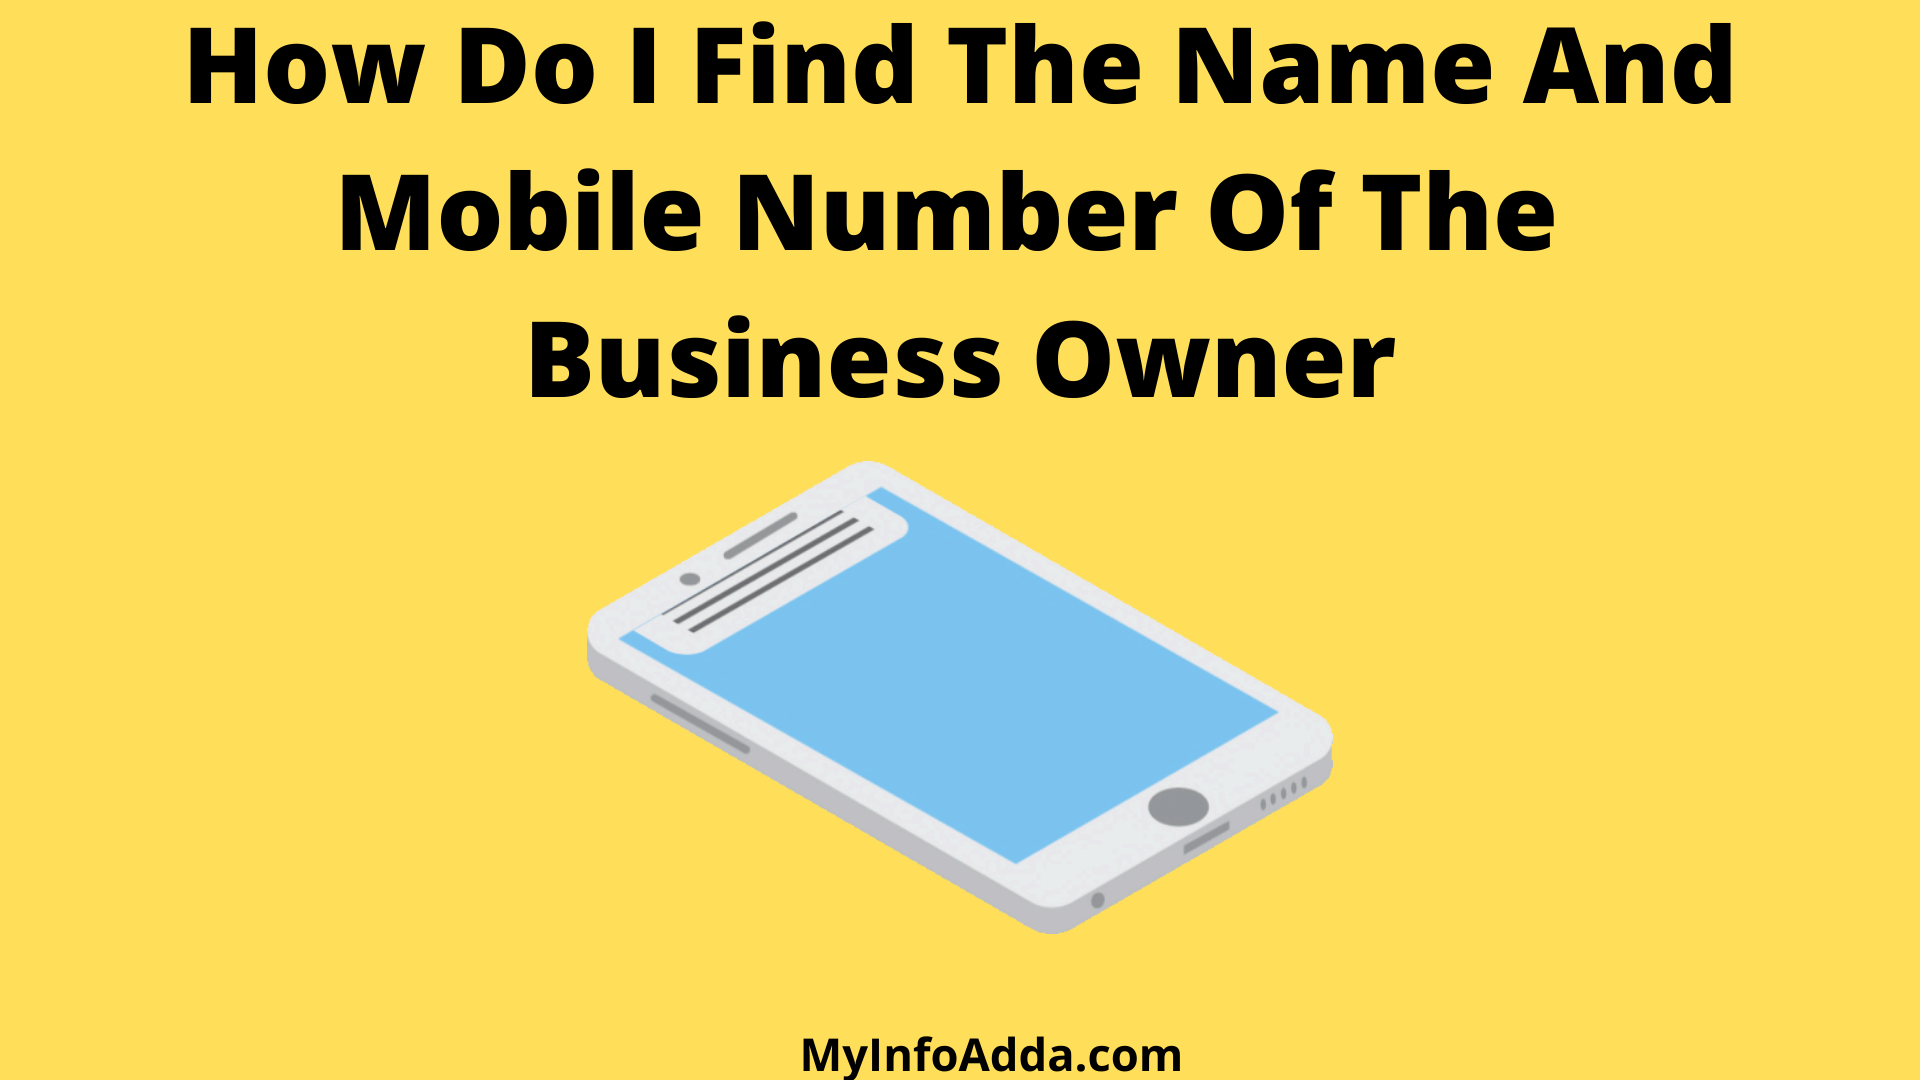 How Do I Find The Name And Mobile Number Of The Business Owner